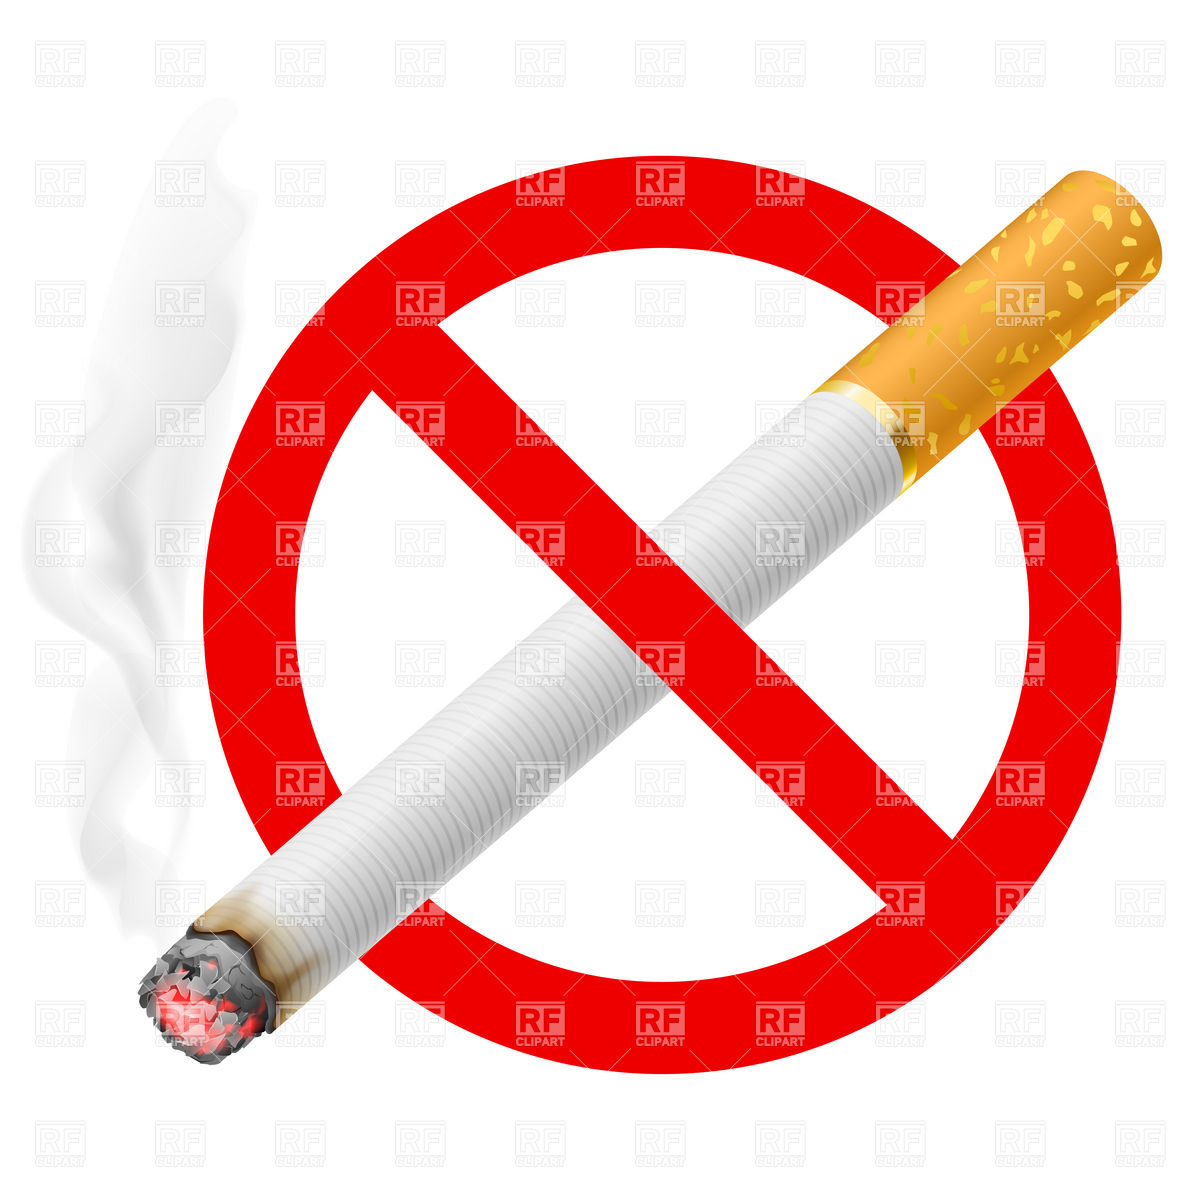 Burning Cigarette Butt Download Royalty Free Vector Clipart  Eps